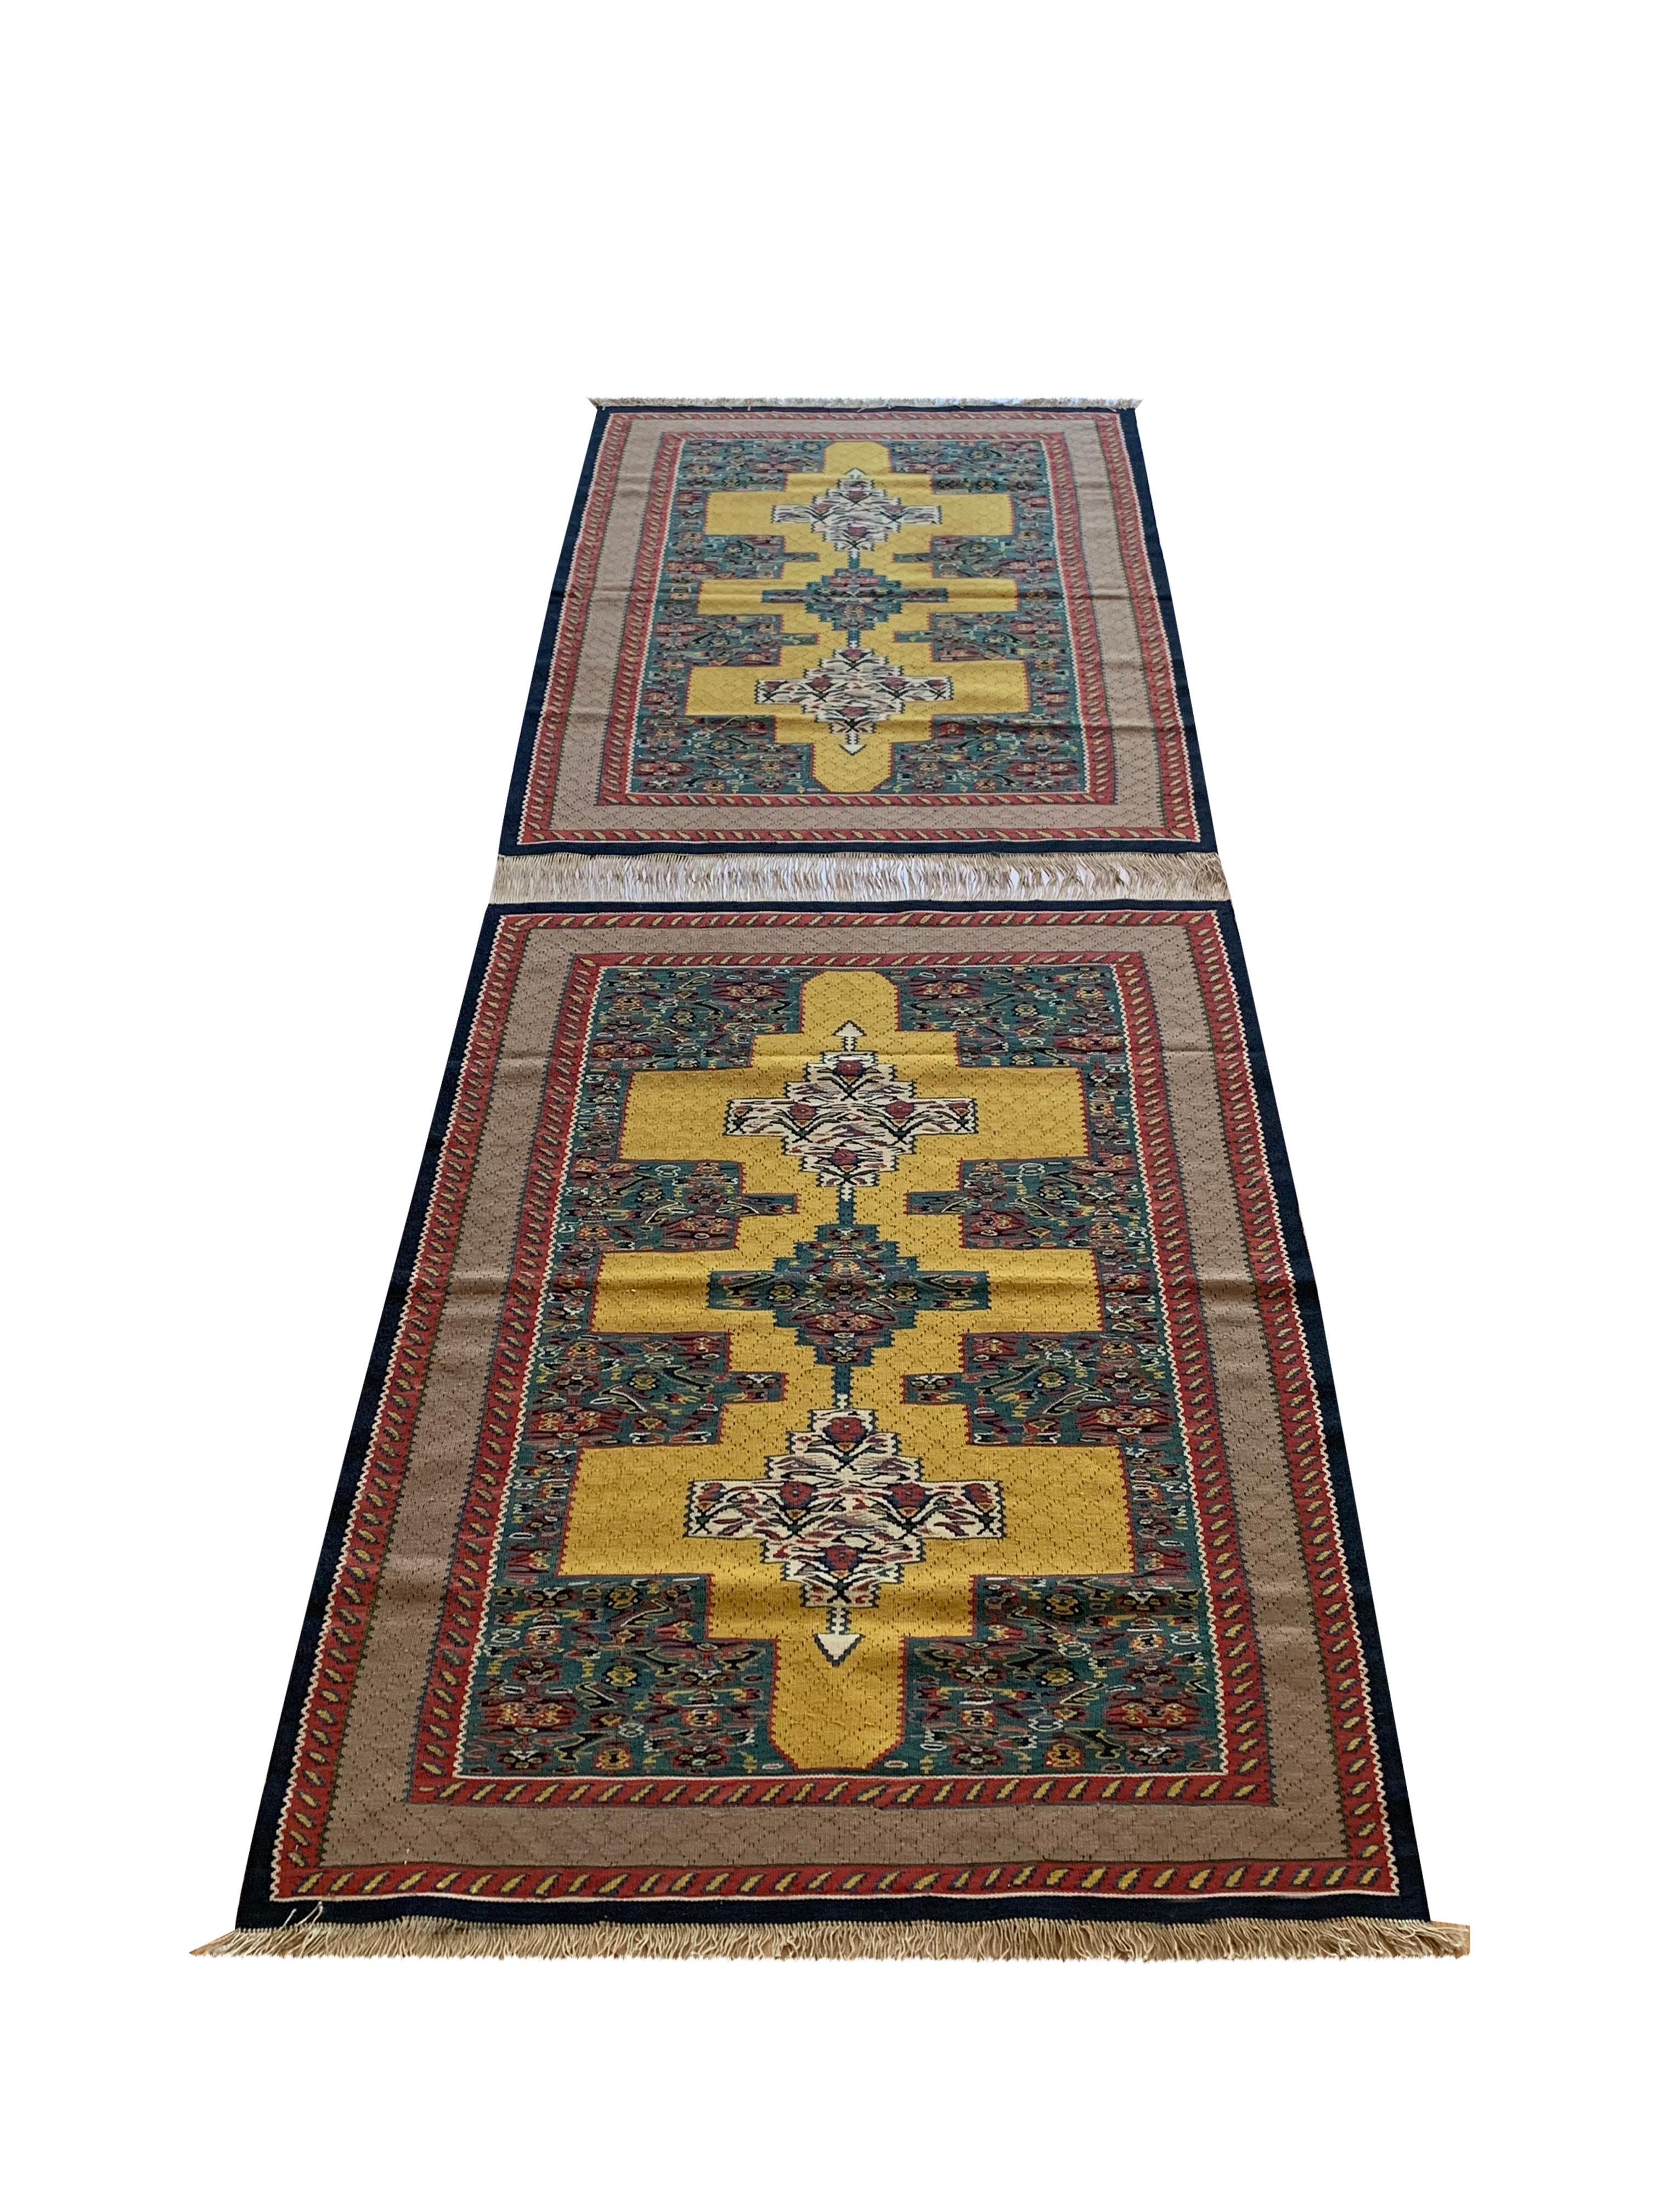 These bold wool rugs are a matching pair of handmade flatwoven kilims, woven by hand in the early 2000s, circa 2010. The design features a trio of geometric medallions woven in accents of ivory, green and red on a yellow background. This has then